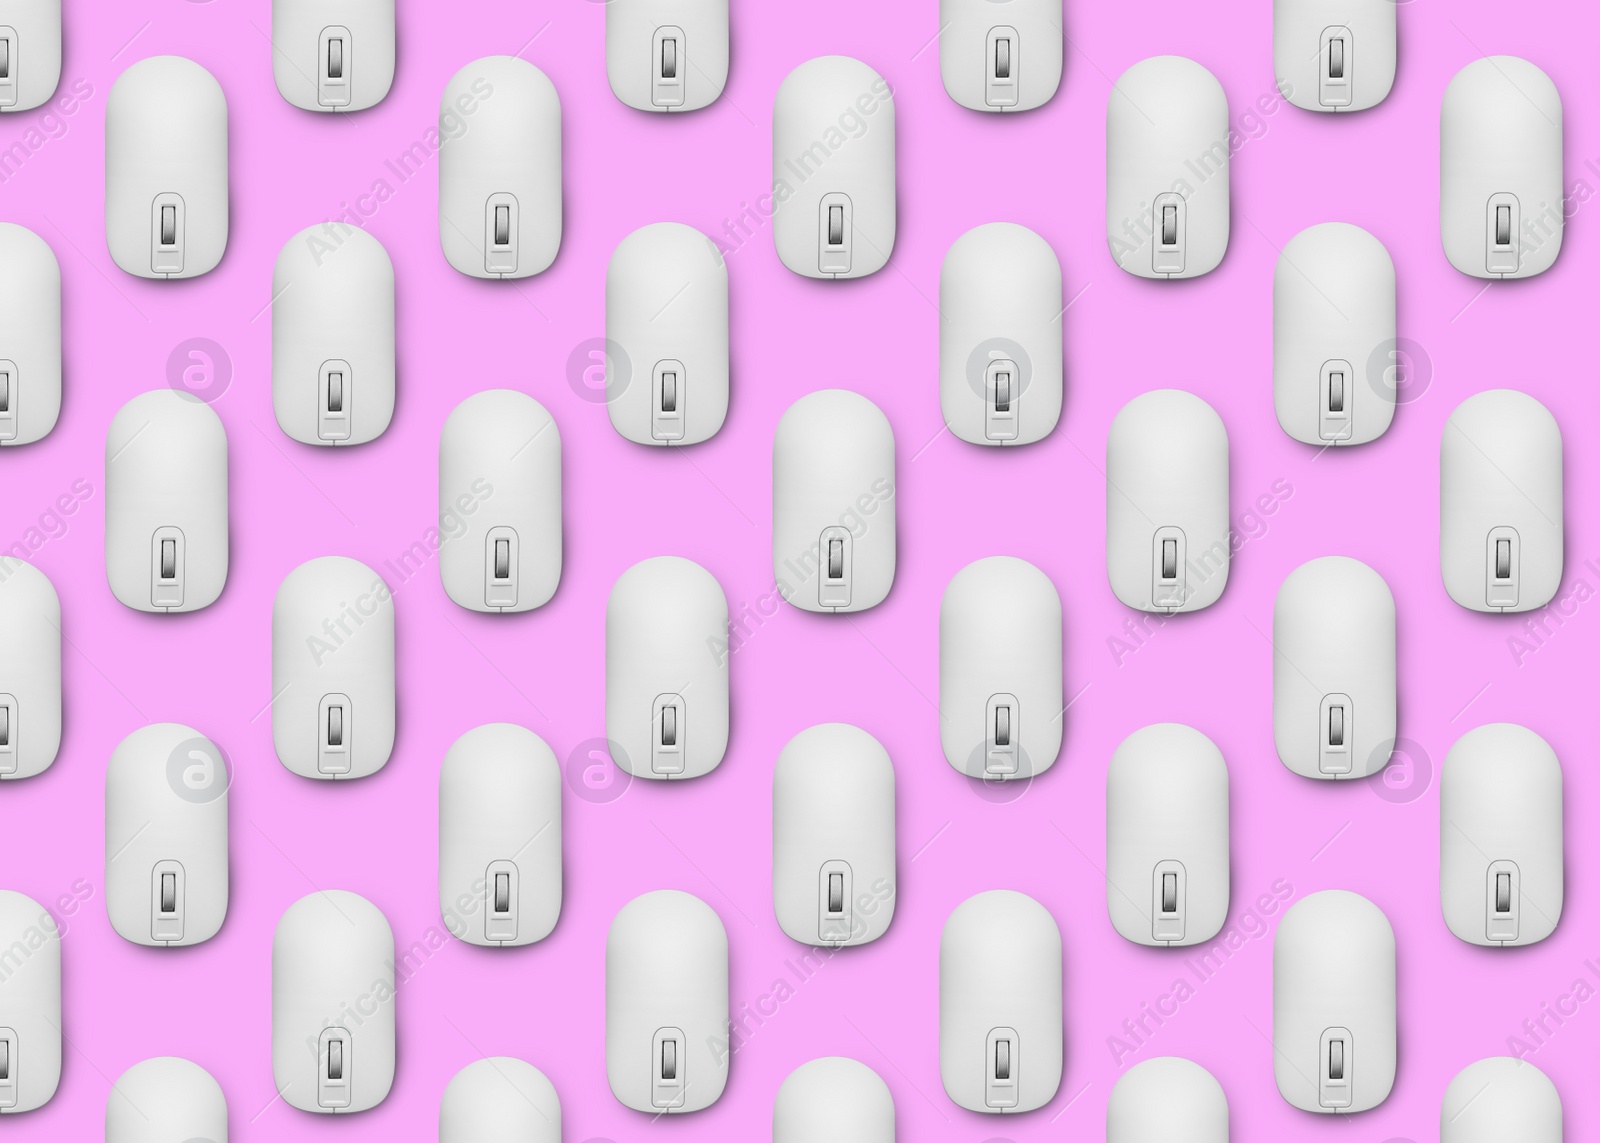 Image of Many white computer mouses on pink background, flat lay. Seamless pattern design